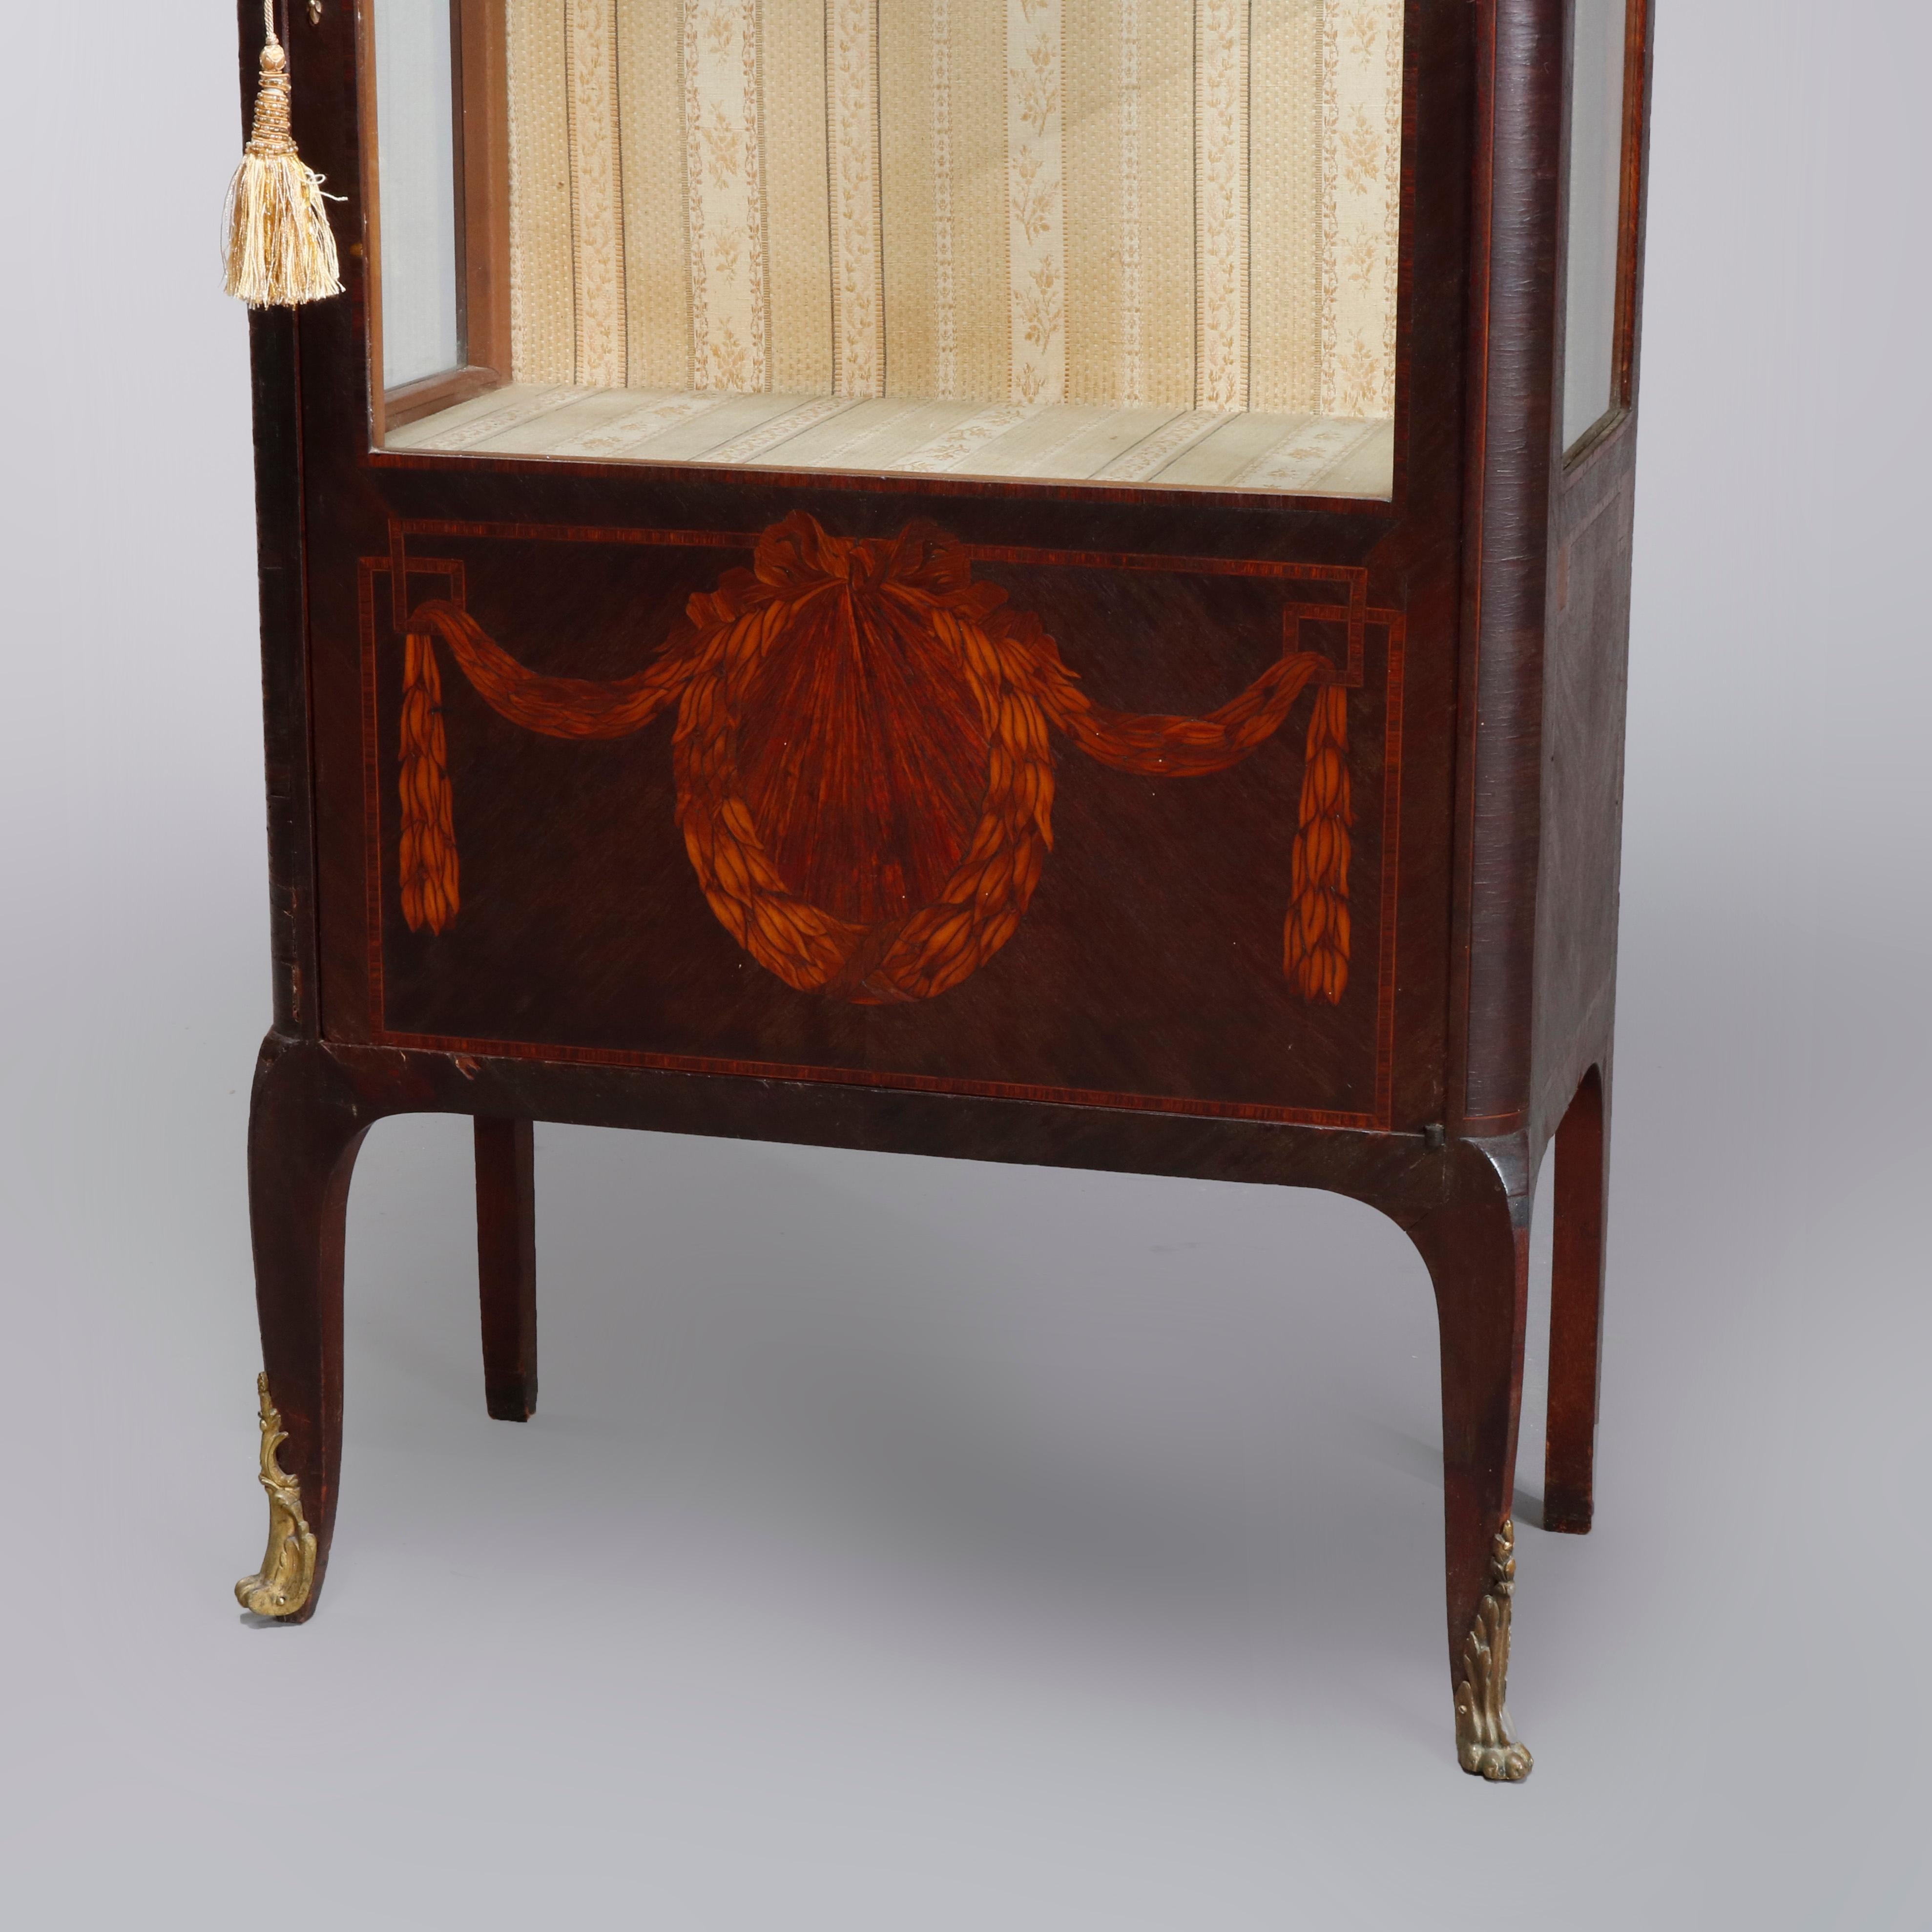 An antique French Louis XV style vitrine offers mahogany case with marble top surmounting mahogany case with scroll, foliate and garland marquetry, single glass door and foliate cast ormolu mounts, with key, circa 1890

Measures: 56.75